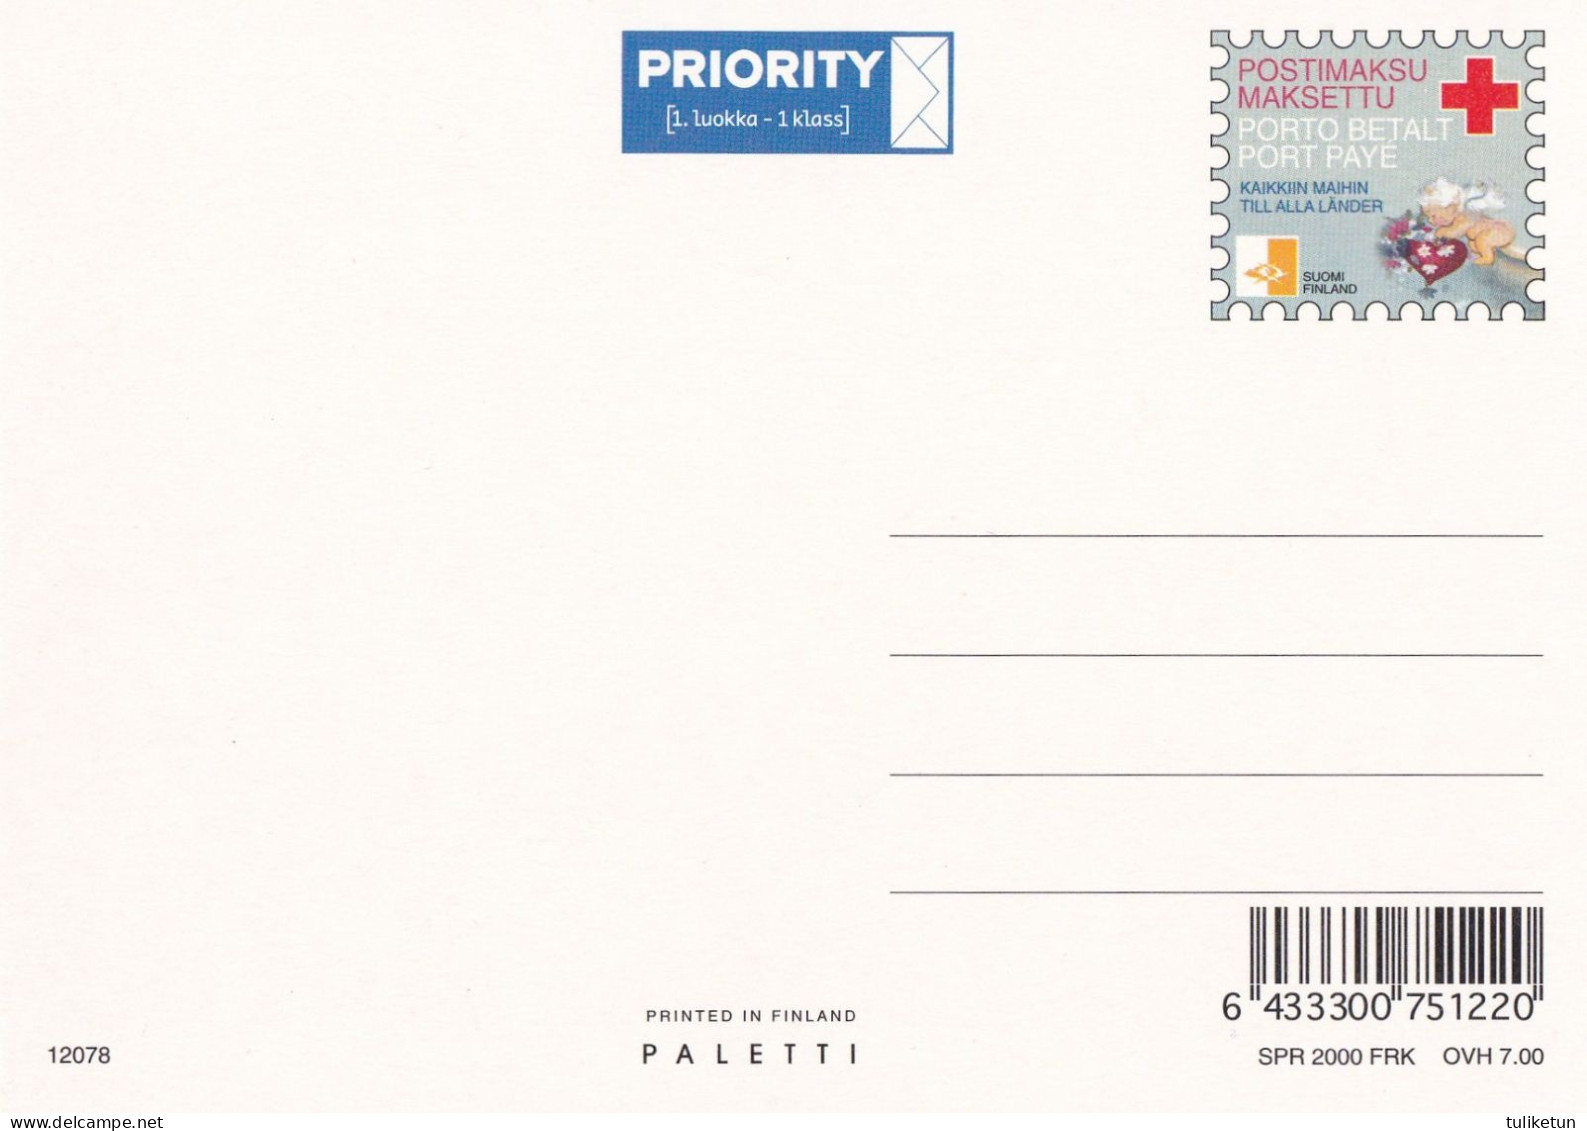 Postal Stationery - Flowers - Roses - Dove Holding An Envelope - Red Cross 2000 - Suomi Finland - Postage Paid - Postal Stationery